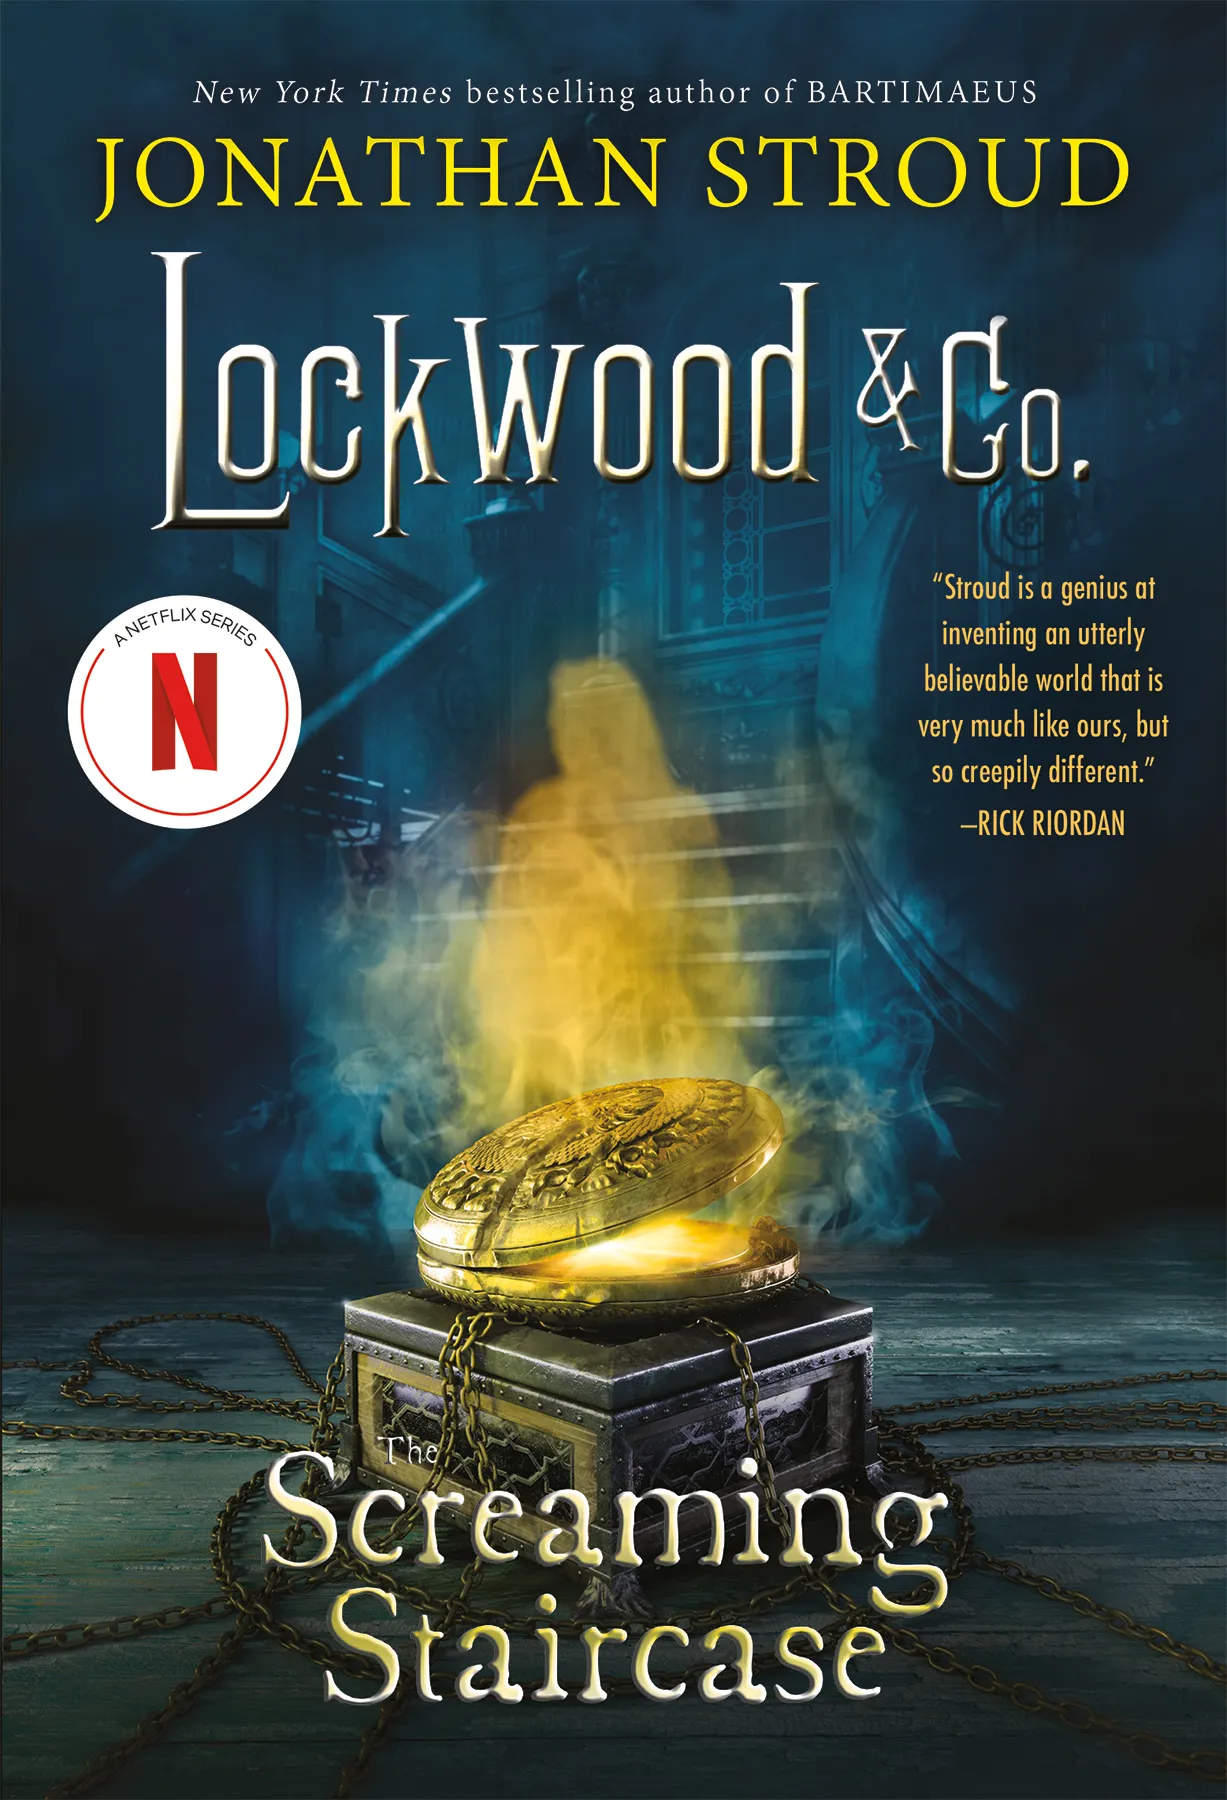 The Screaming Staircase (Lockwood & Co. #1)